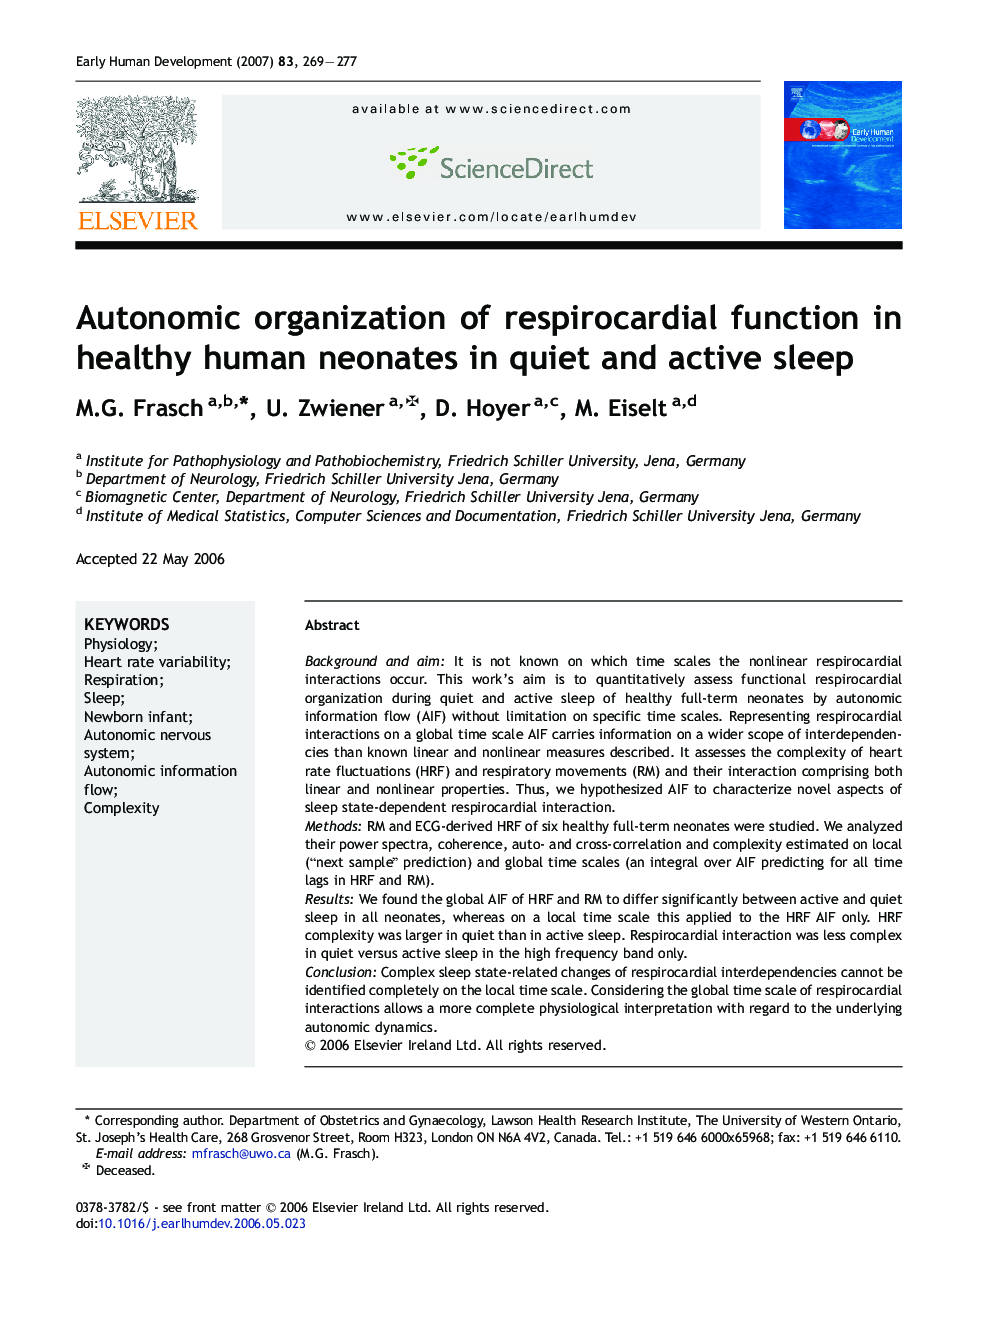 Autonomic organization of respirocardial function in healthy human neonates in quiet and active sleep